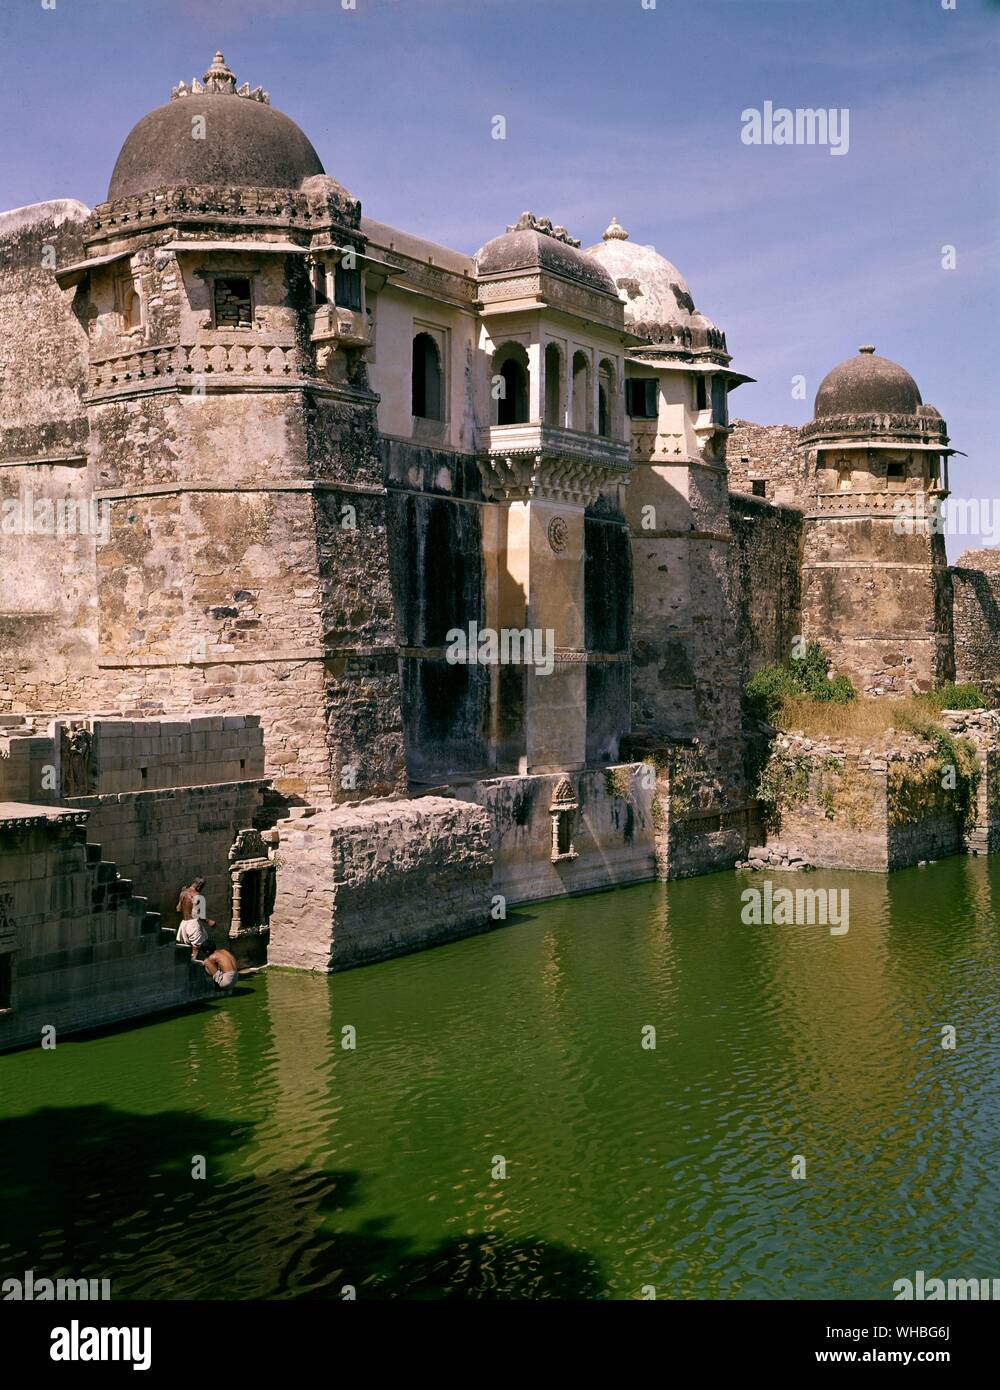 Palace in the fort of Chitor, taken by Akbar in 1568 - Today, Chittor, now a prominent tourist attraction, remains the largest fortress in Rajasthan.. Stock Photo